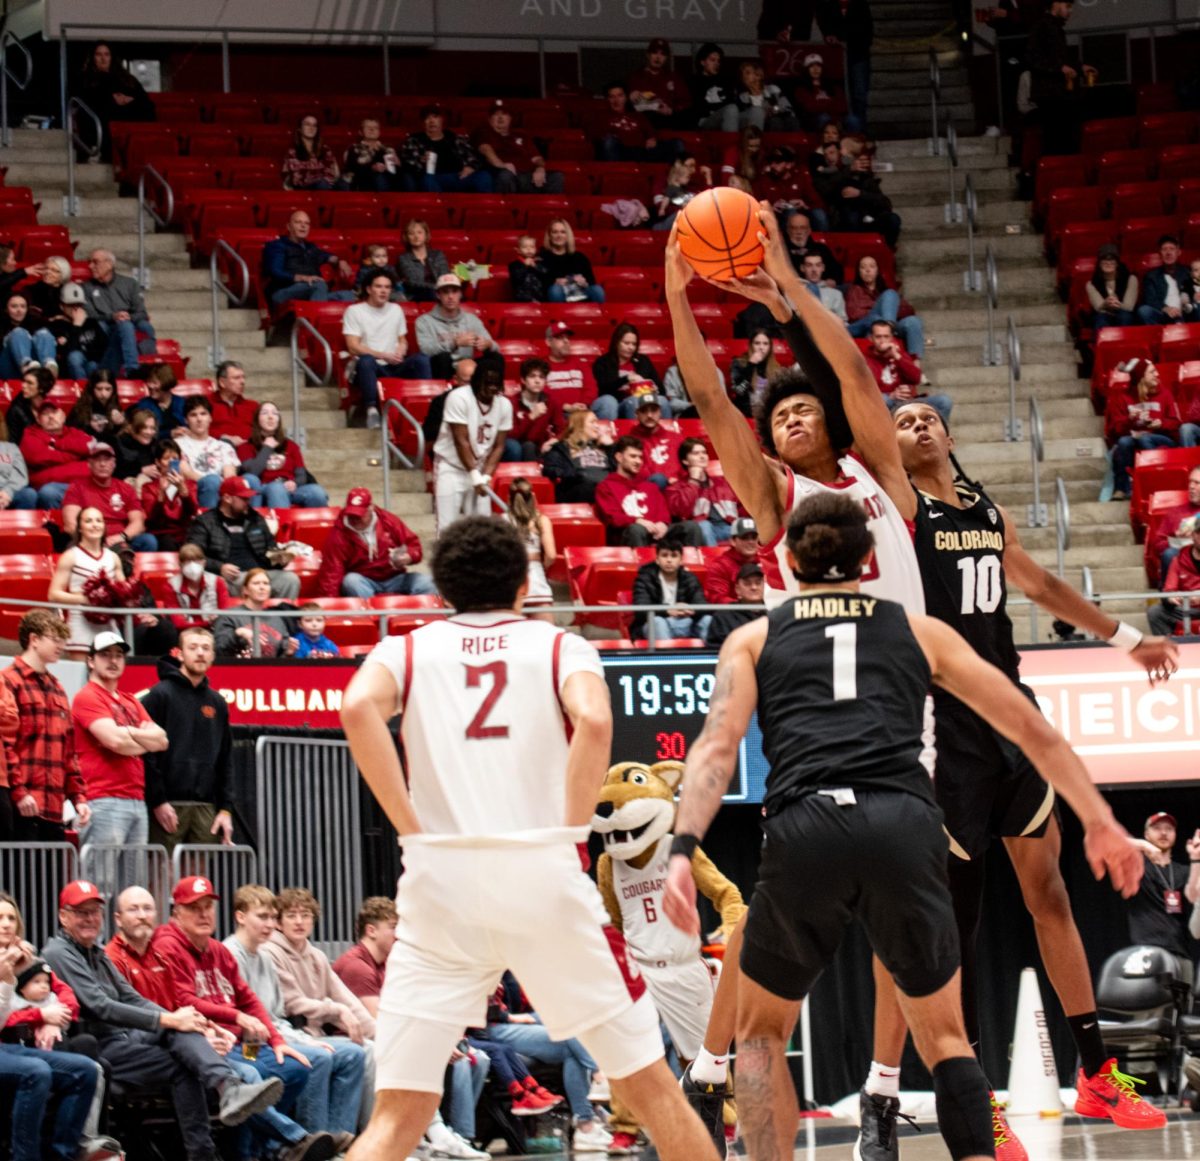 WSU forward Jaylen Wells leaps for the ball as guard Myles Rice looks on during WSU mens basketballs 78-69 win over Colorado, Jan. 27 in Pullman, Wash. 